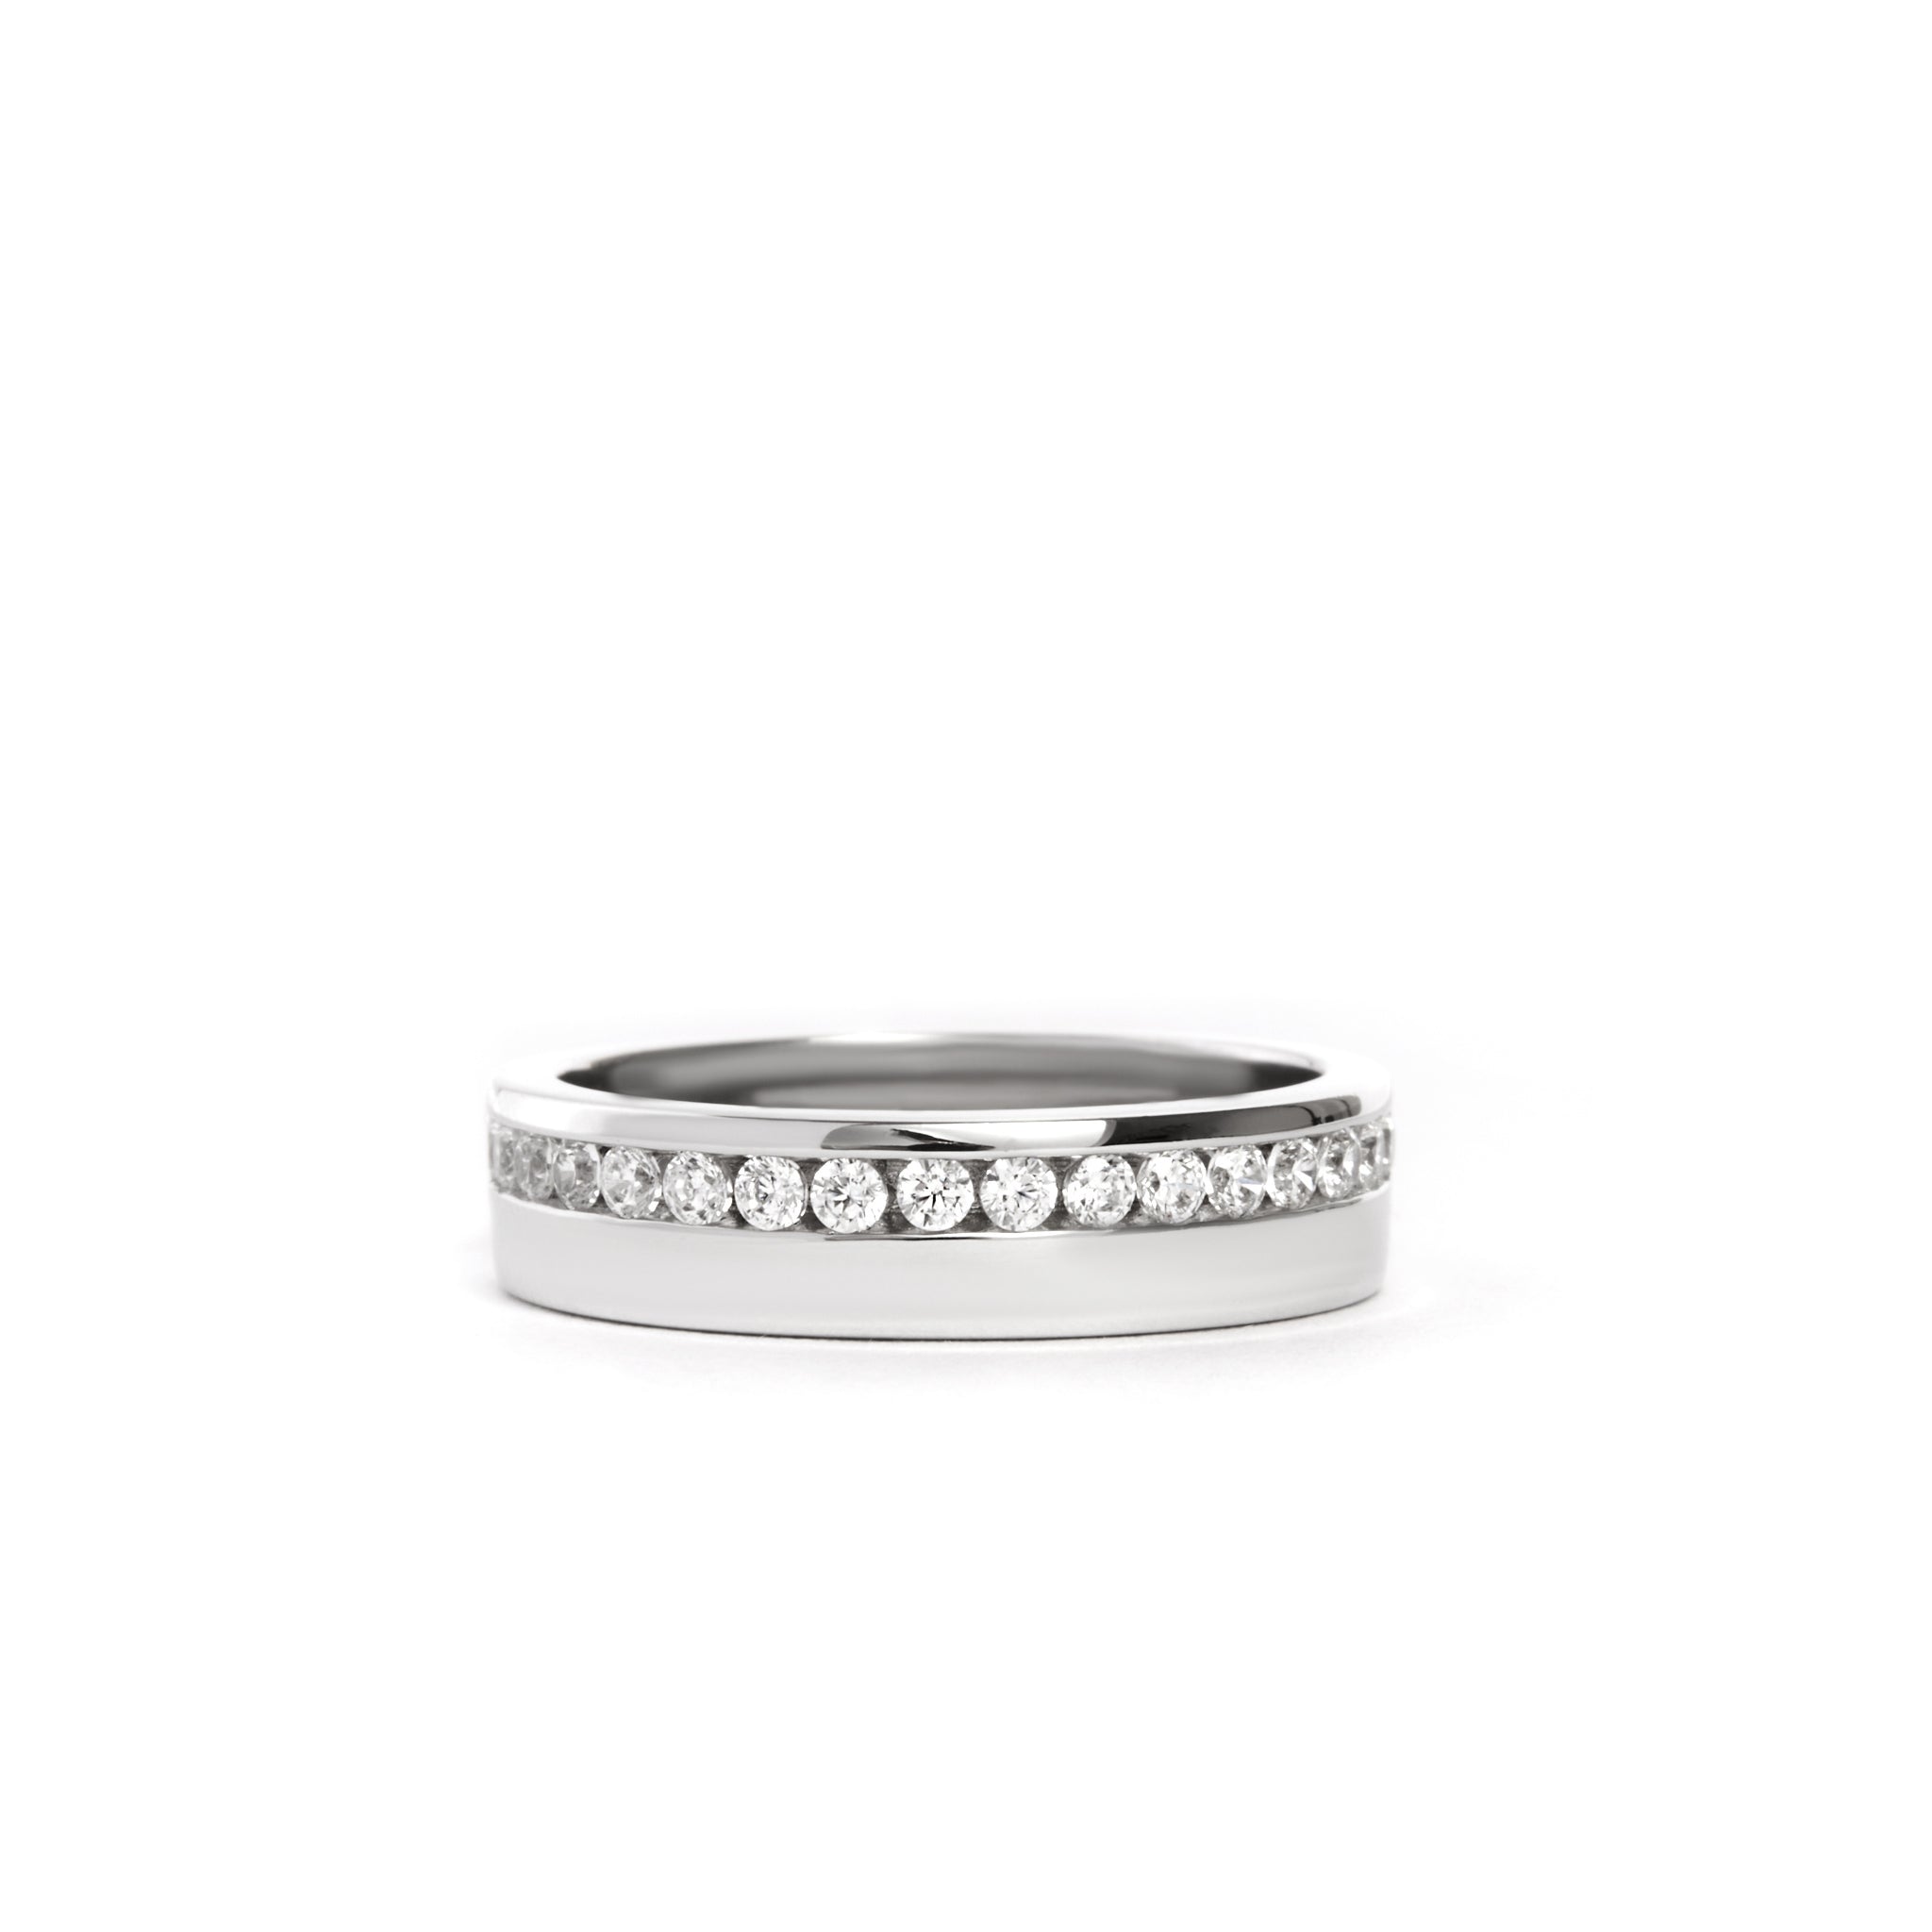 Exquisite ring crafted to perfection, featuring 18k White Gold material, Round Brilliant Cut Natural Diamonds with a Total Diamond Weight of 0.37ct, G/H Colour, SI Clarity, and customizable options. Elevate your style with this stunning piece, radiating timeless elegance and sophistication